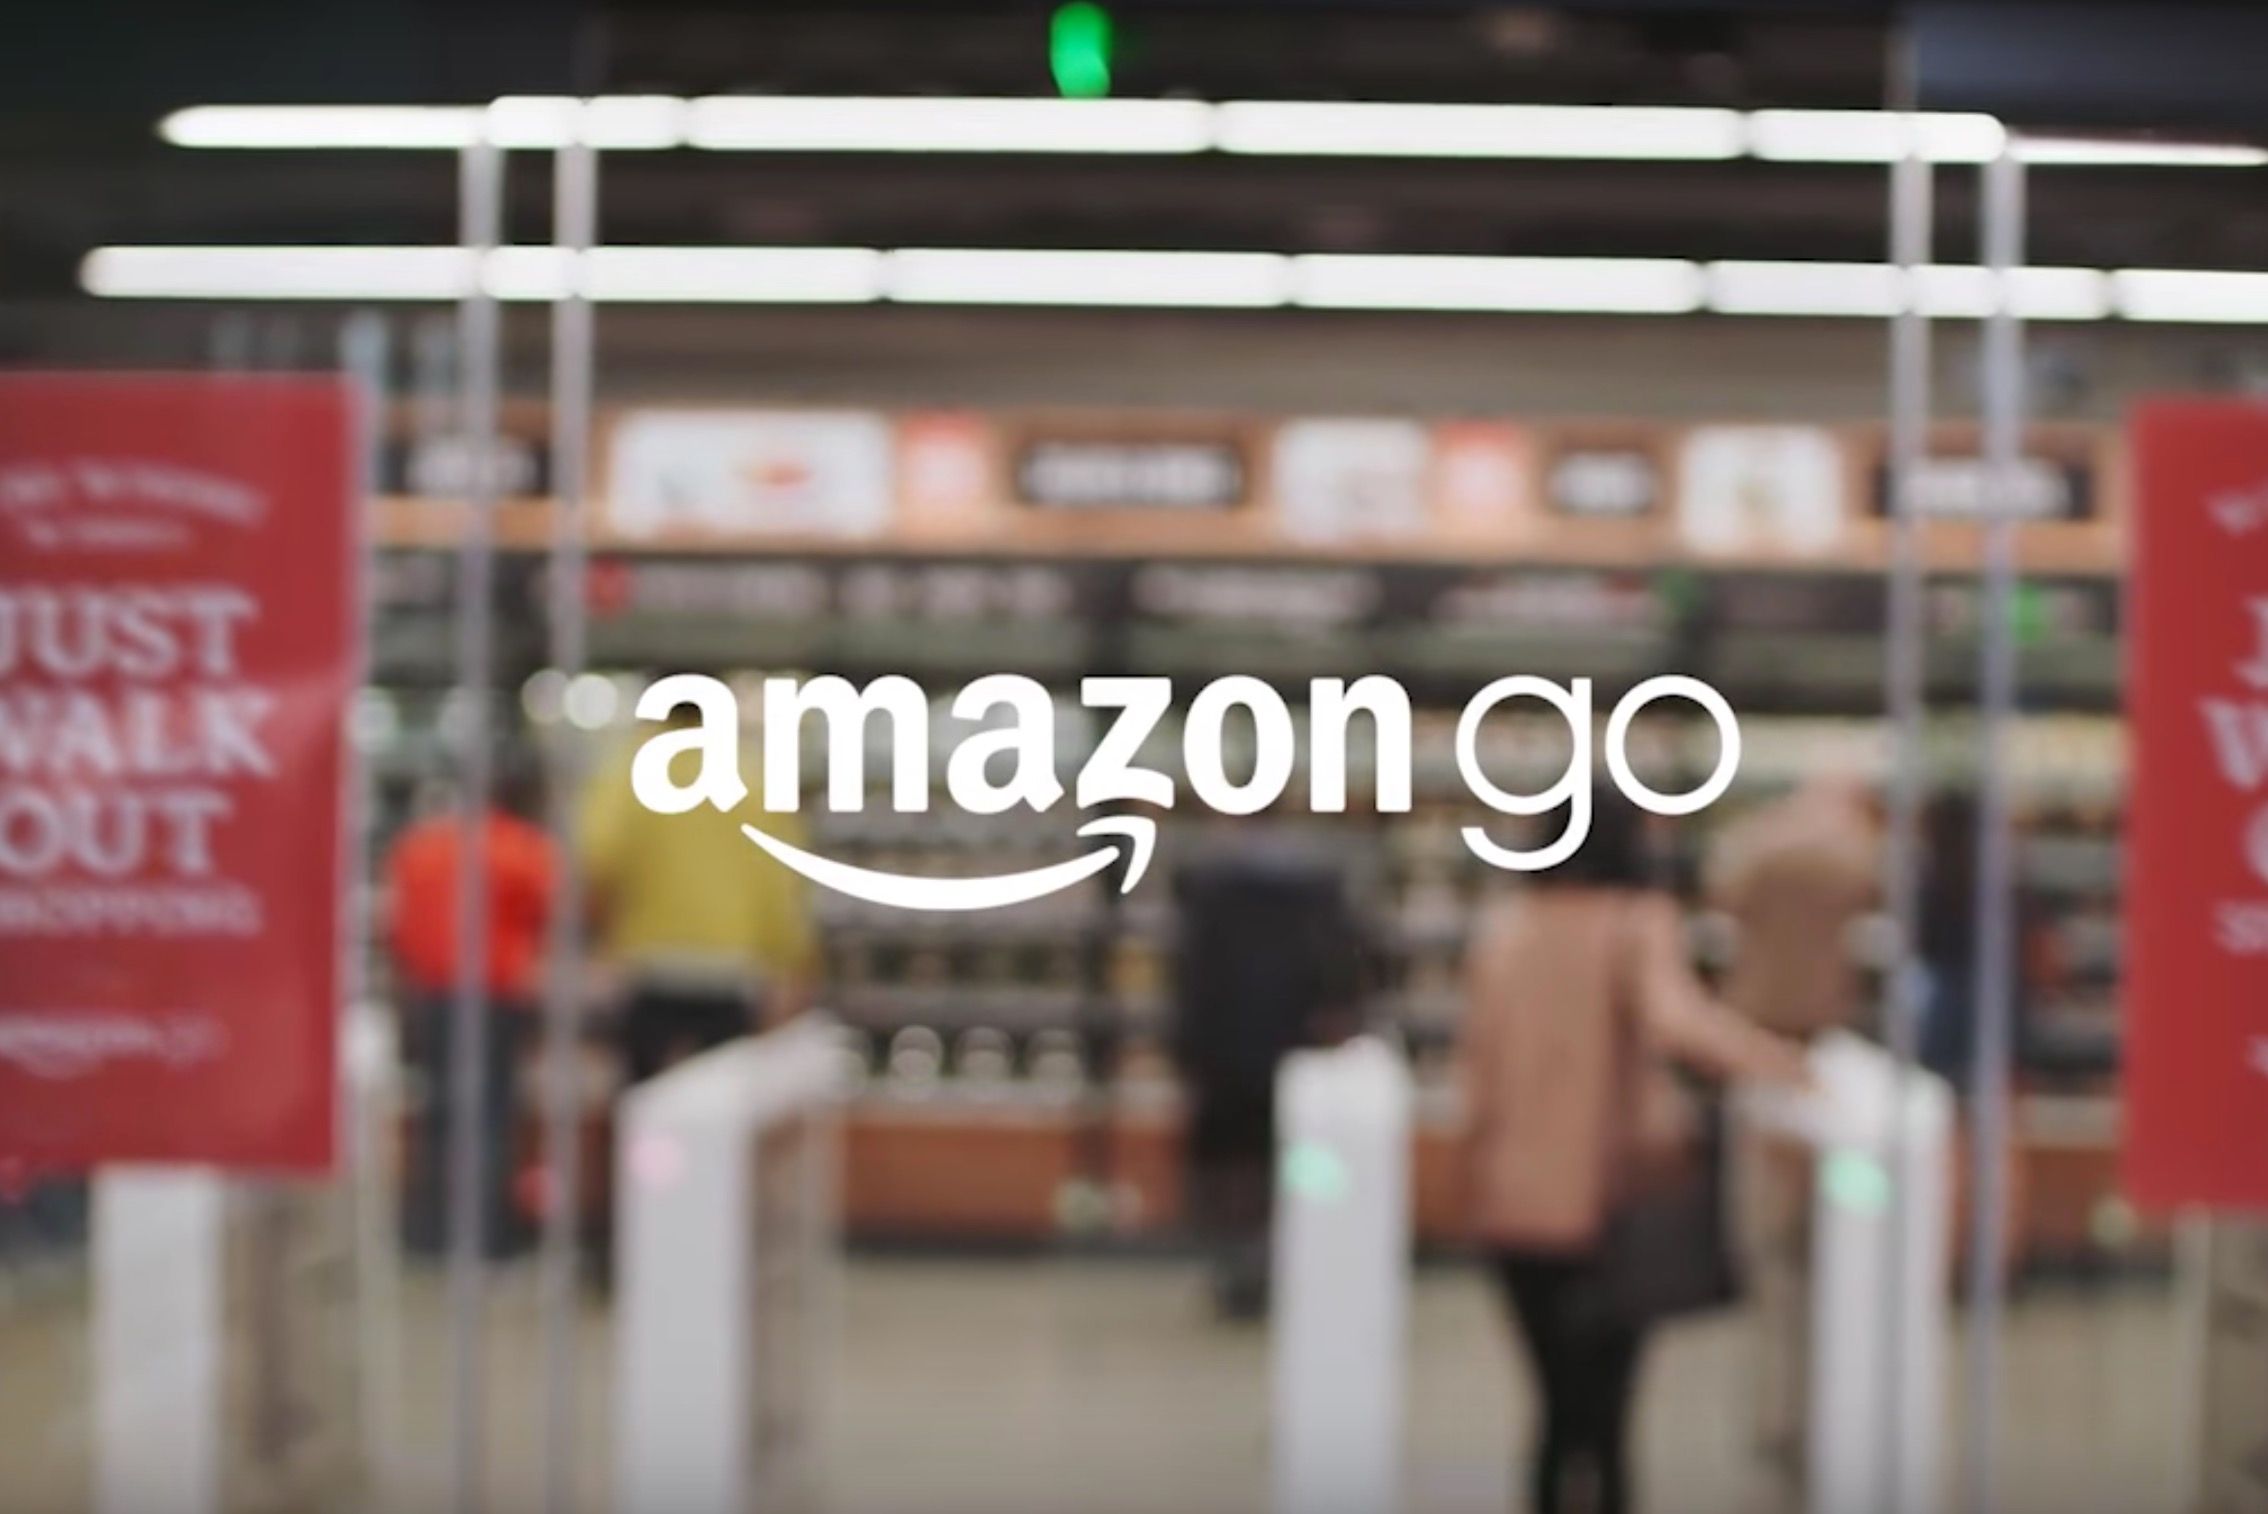 Amazon Go Has Been Expanded To A Full-size Supermarket image 1